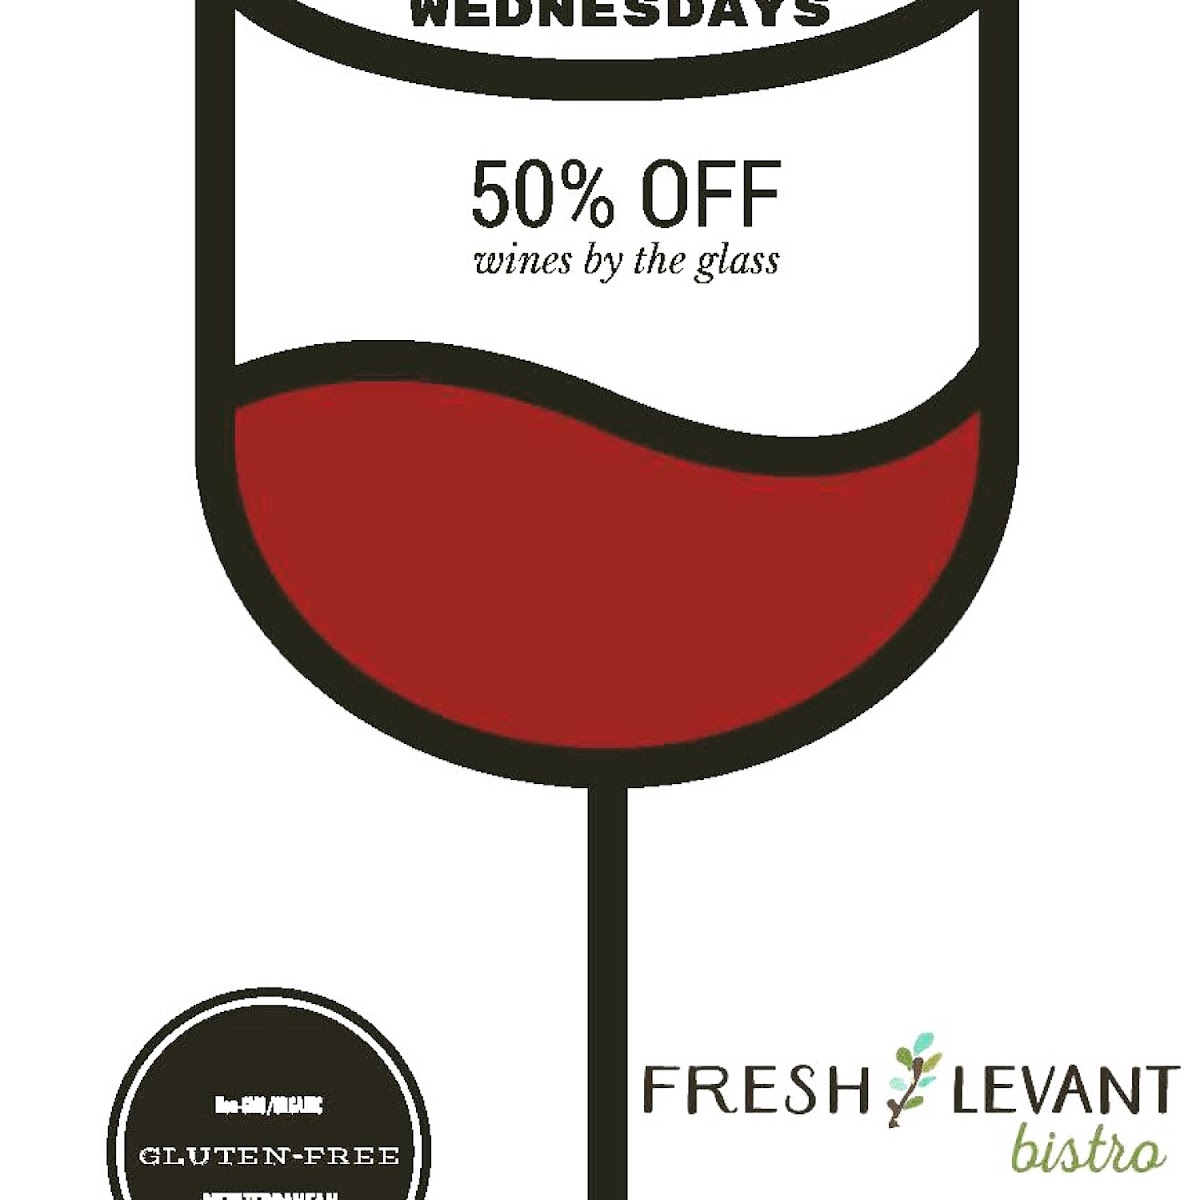 Wine down with us every Wednesday with 50% off wines by the glass